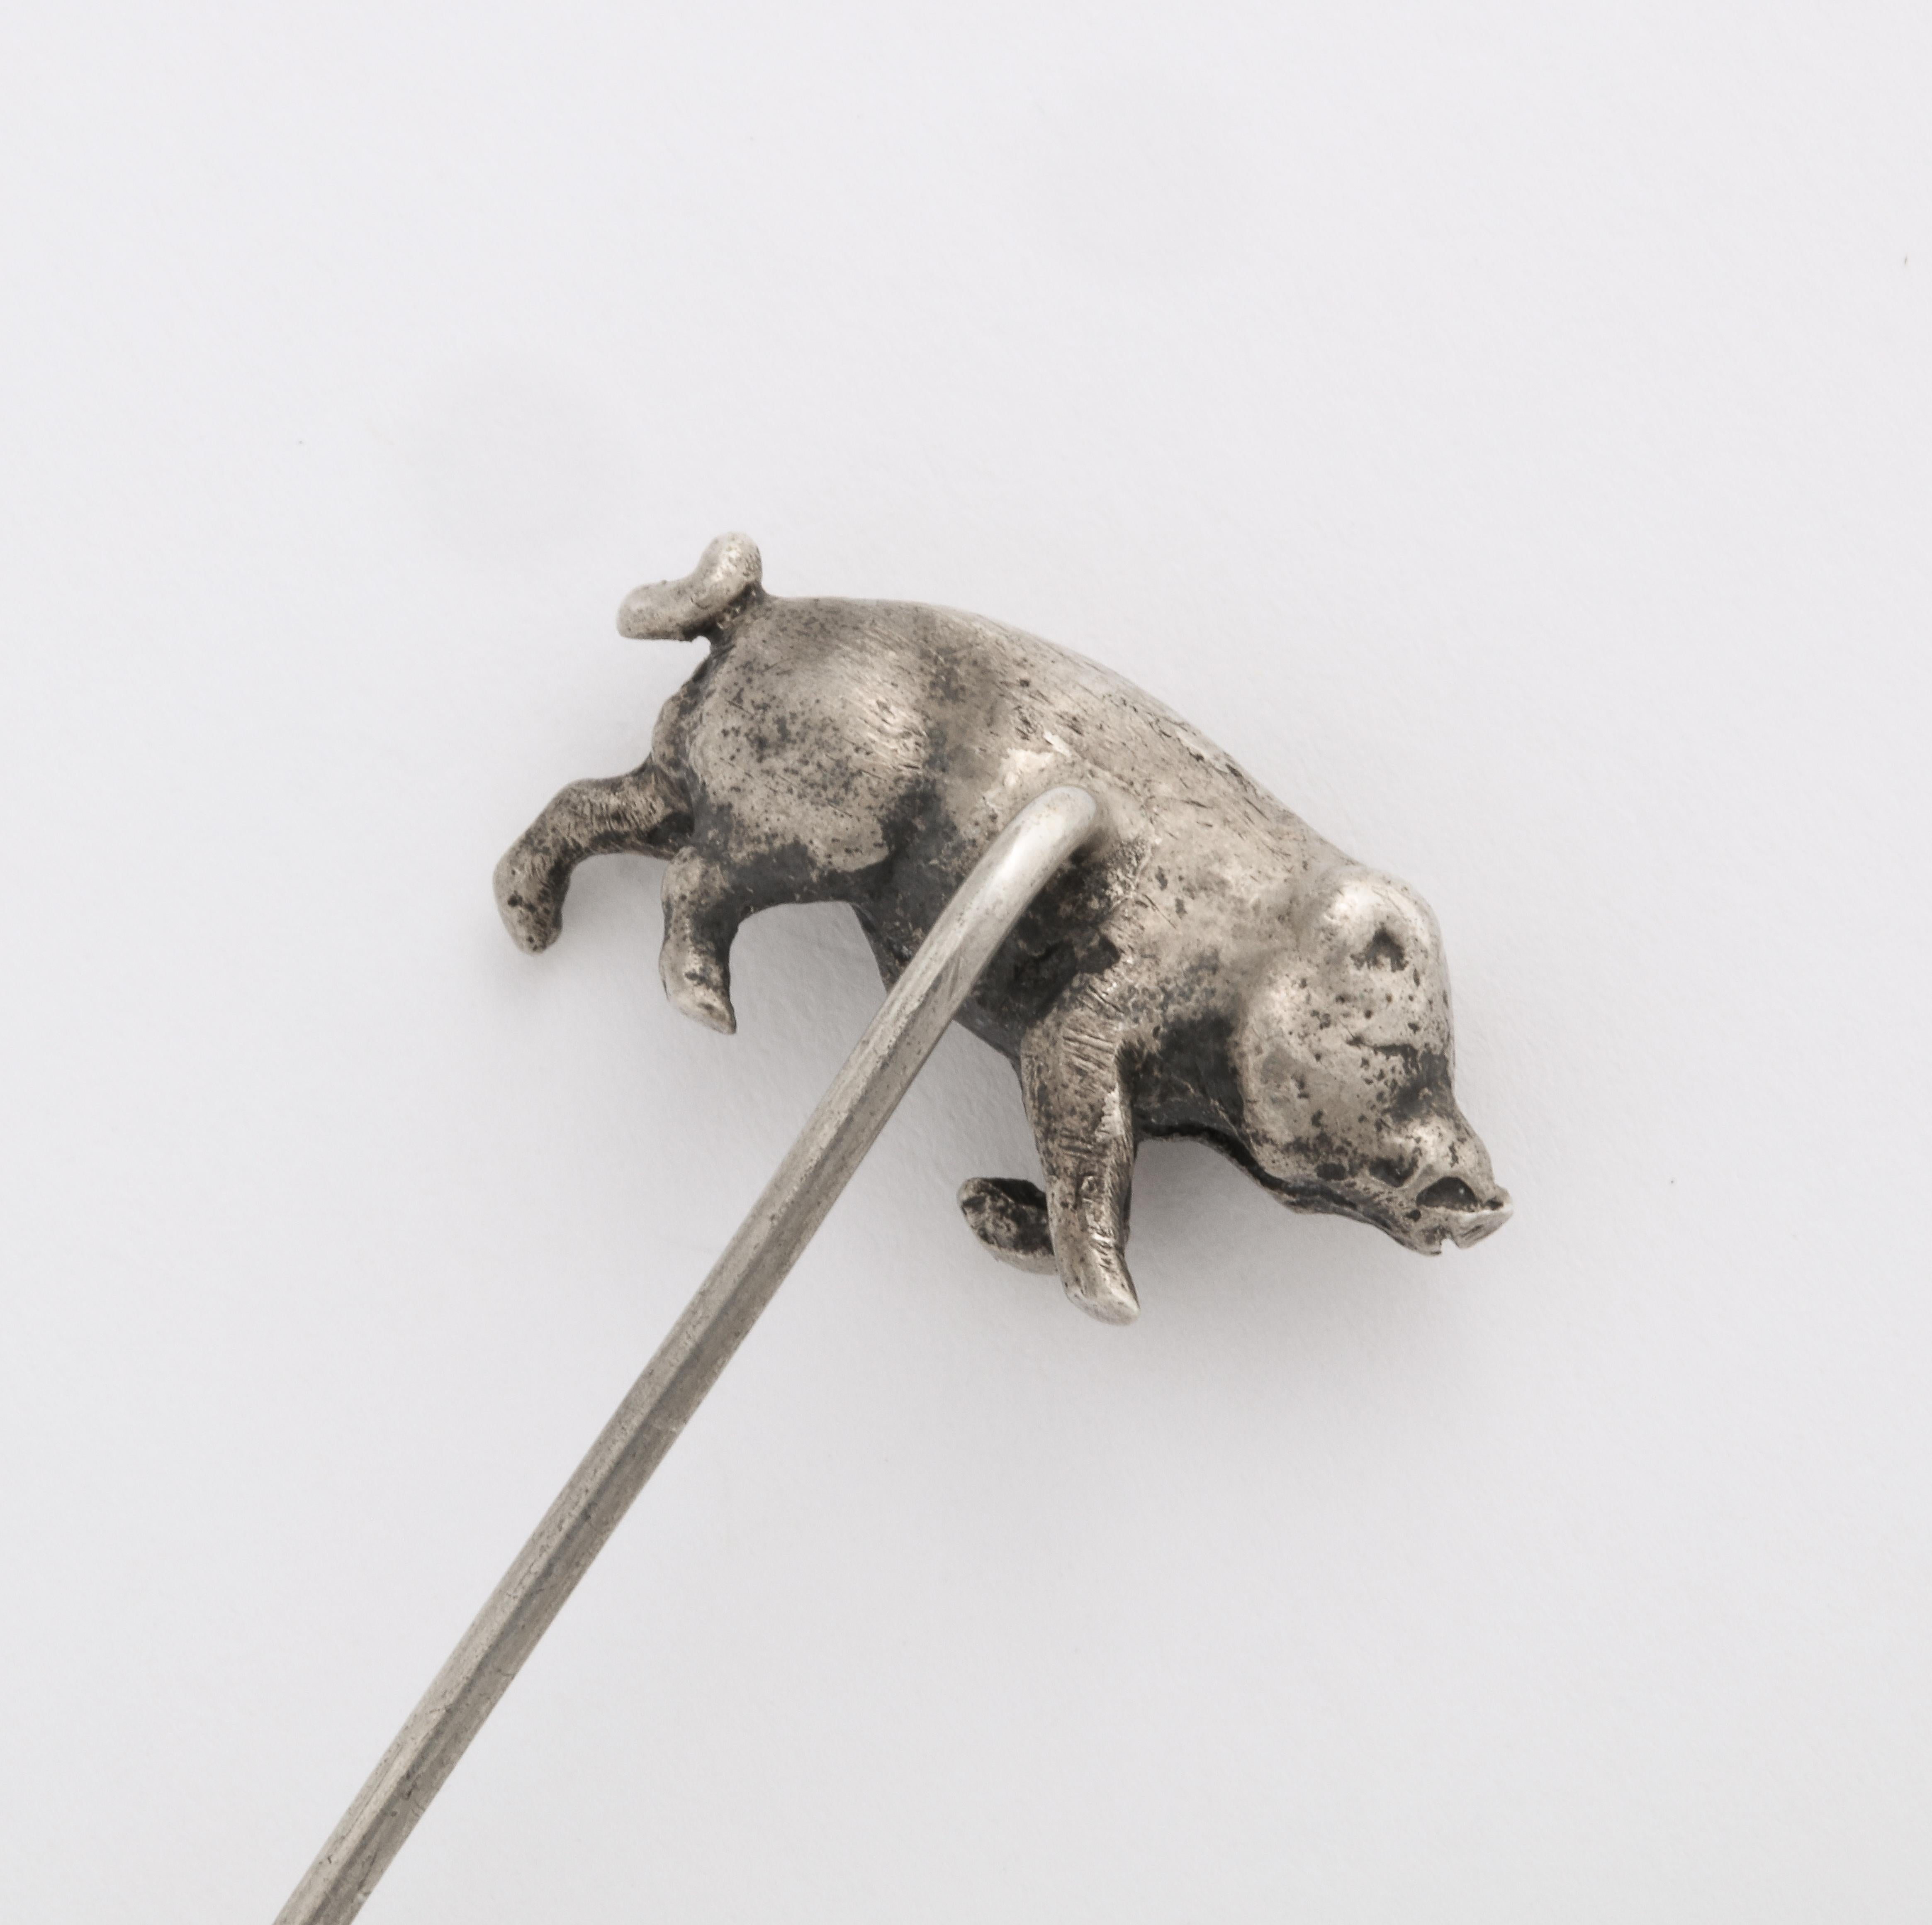 Here piggy, piggy is not what you say to a wild boar unless it is an silver stickpin. It is very much like a wild boar appears in person.I have seen them them at close range. The stickpin is whimsical and full of character with its curlicue tail.